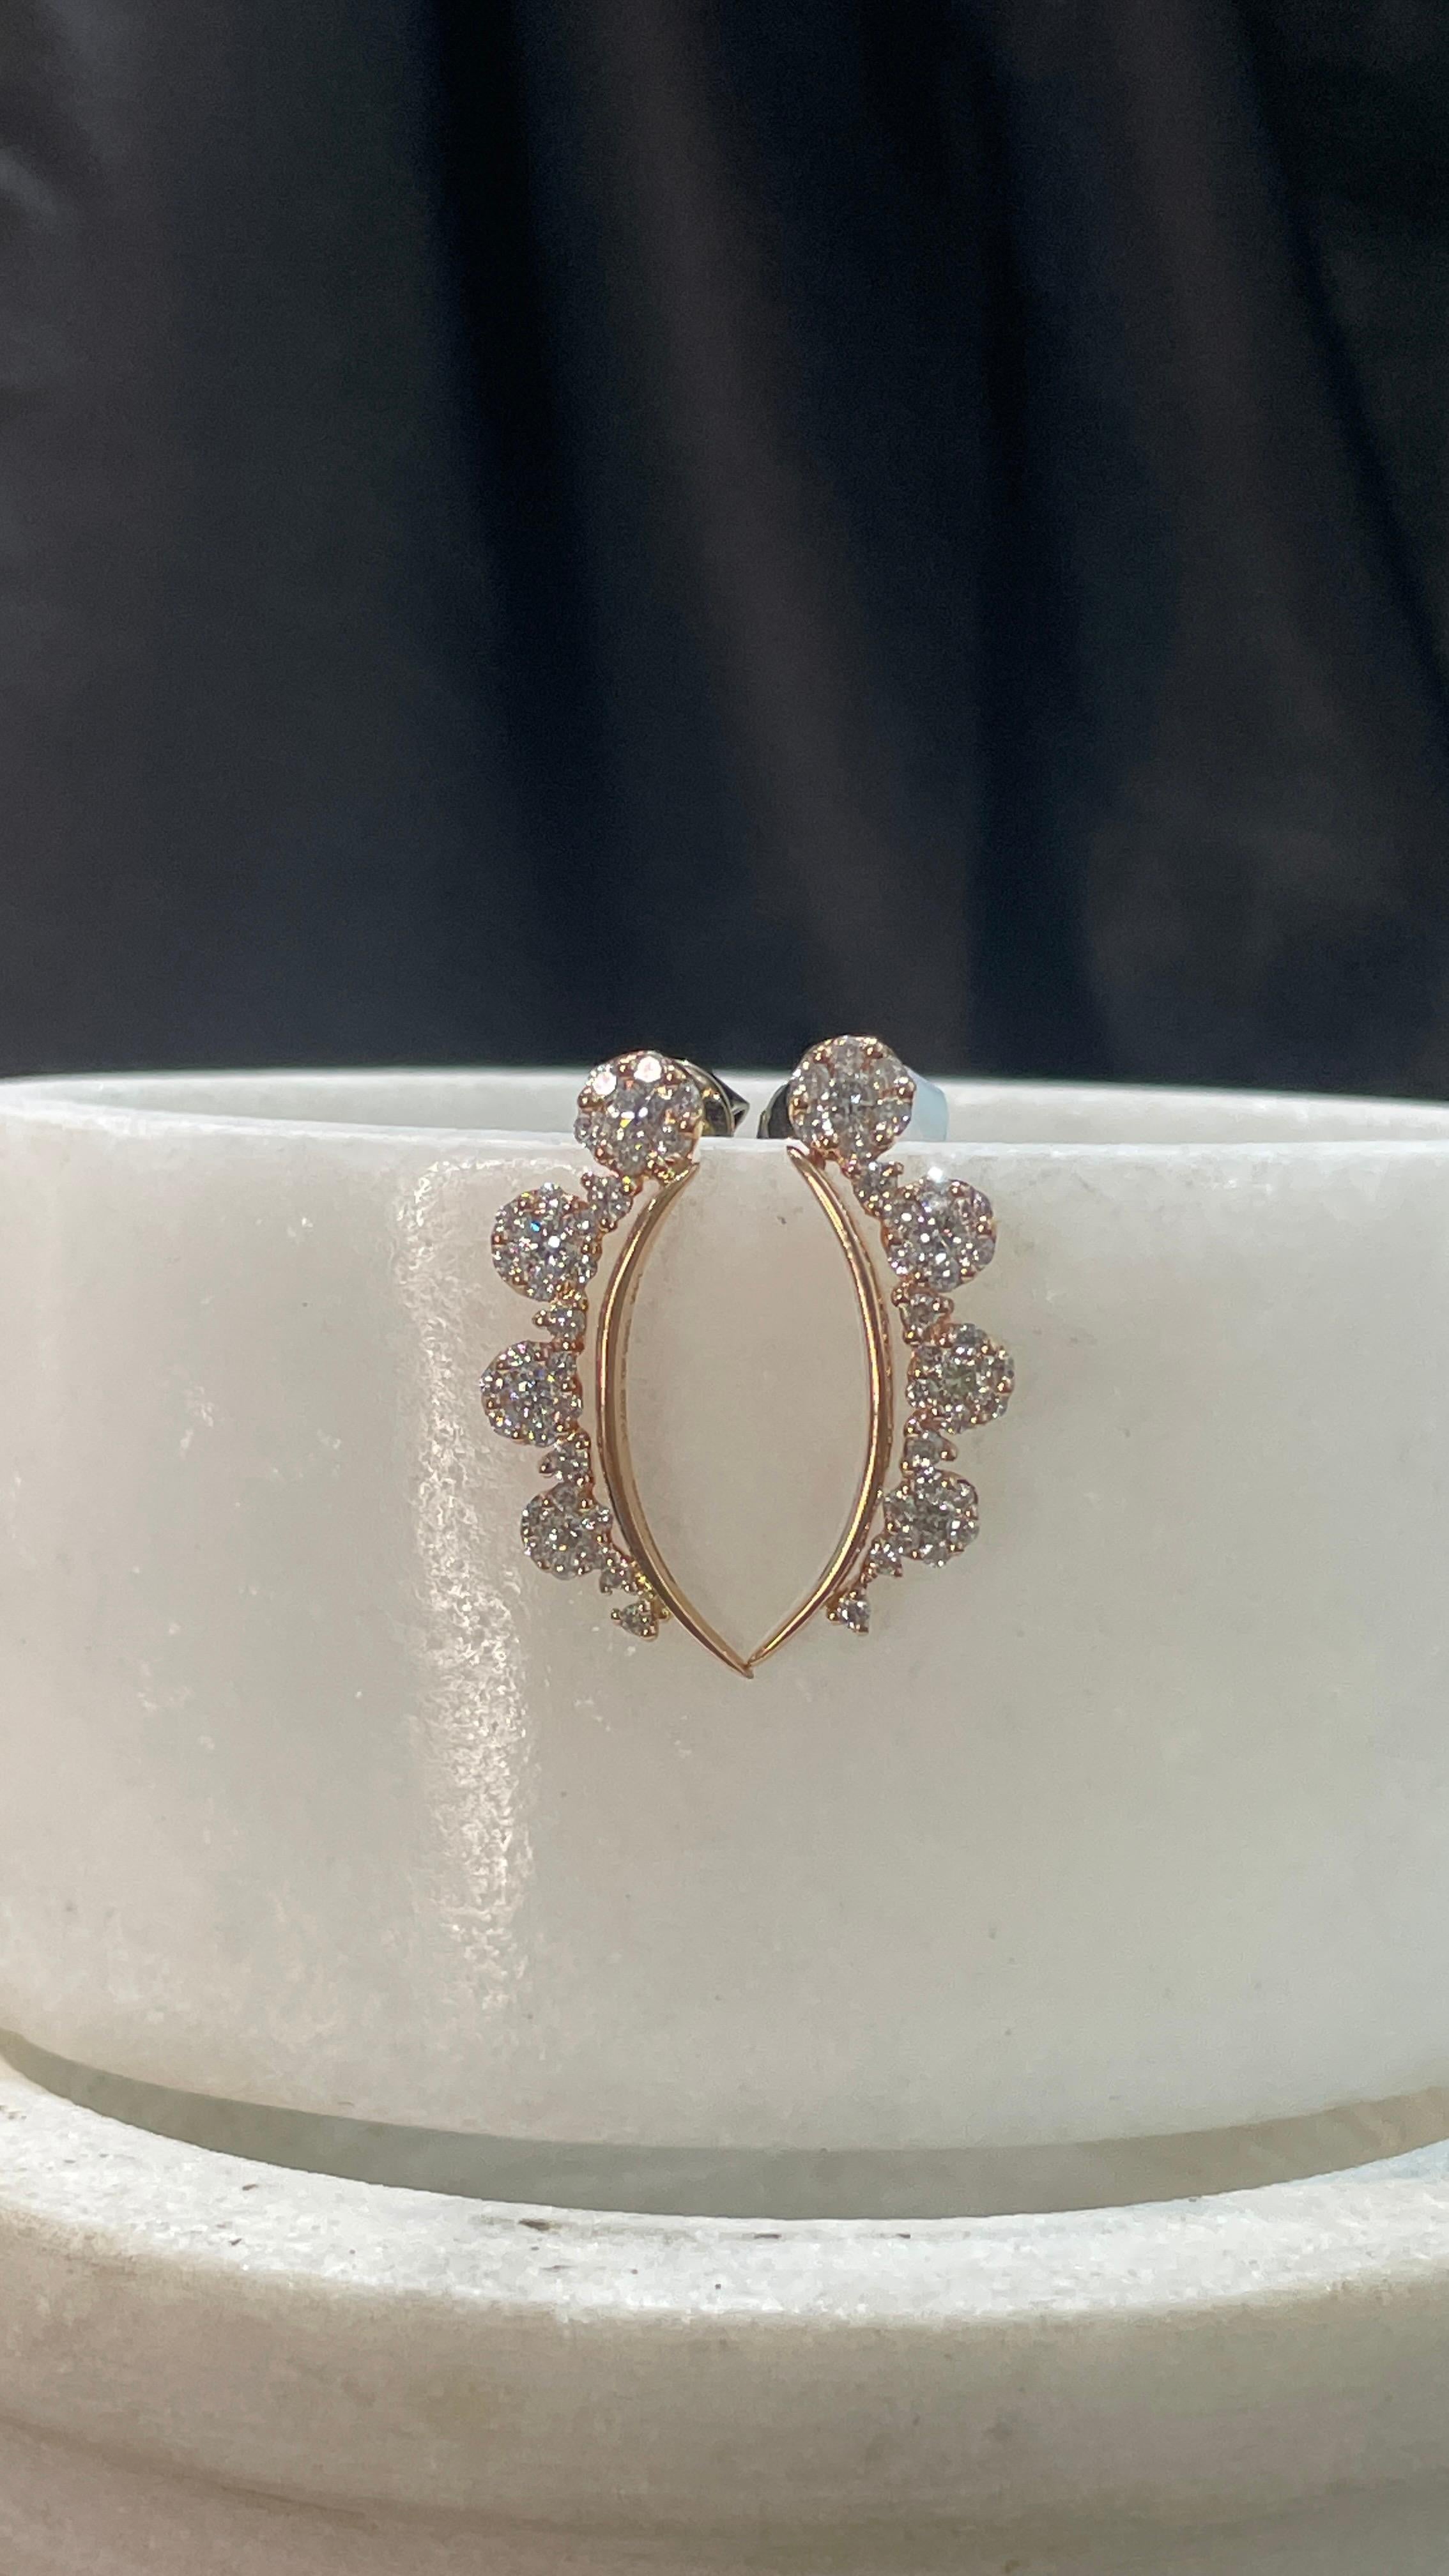 Diamond Curve Stud Earrings Gift for Daughter in 14K Gold to make a statement with your look. You shall need stud earrings to make a statement with your look. These earrings create a sparkling, luxurious look featuring round cut diamond.
April